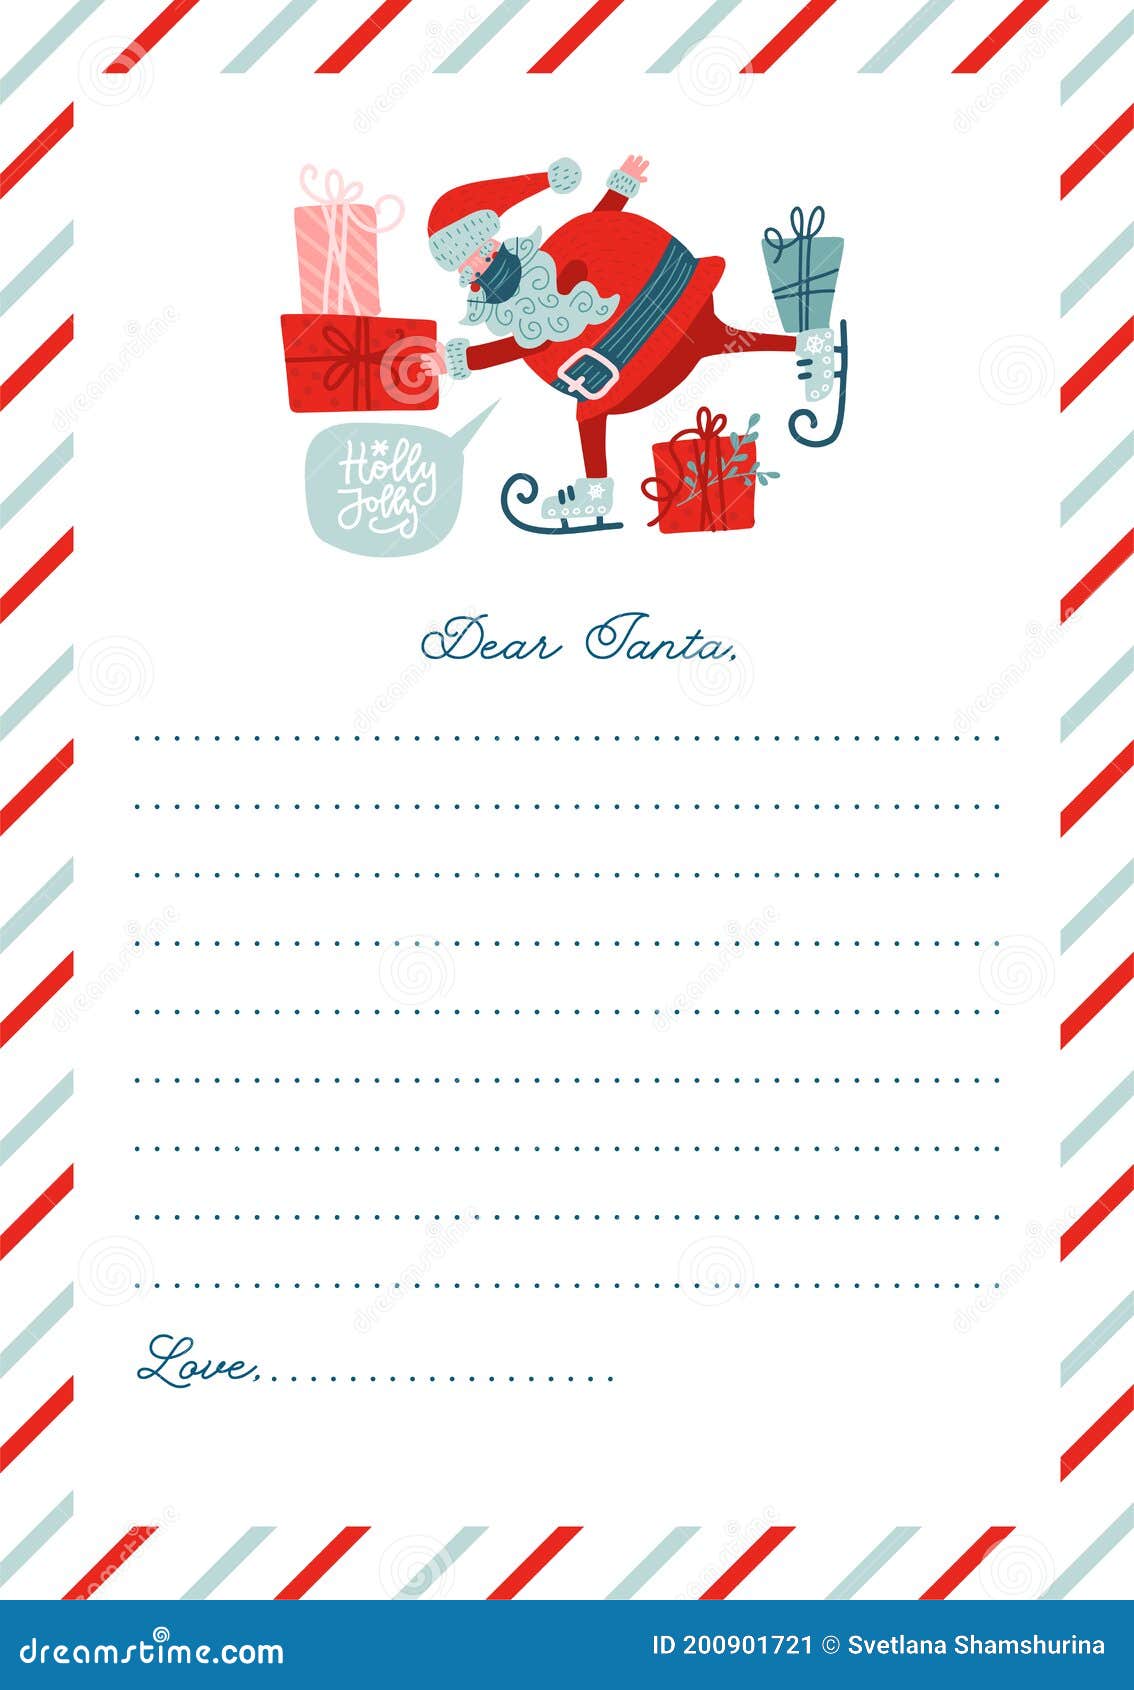 Santa Letter Scratch Card Nice List Gift Present Christmas Eve Box  Personalised  eBay